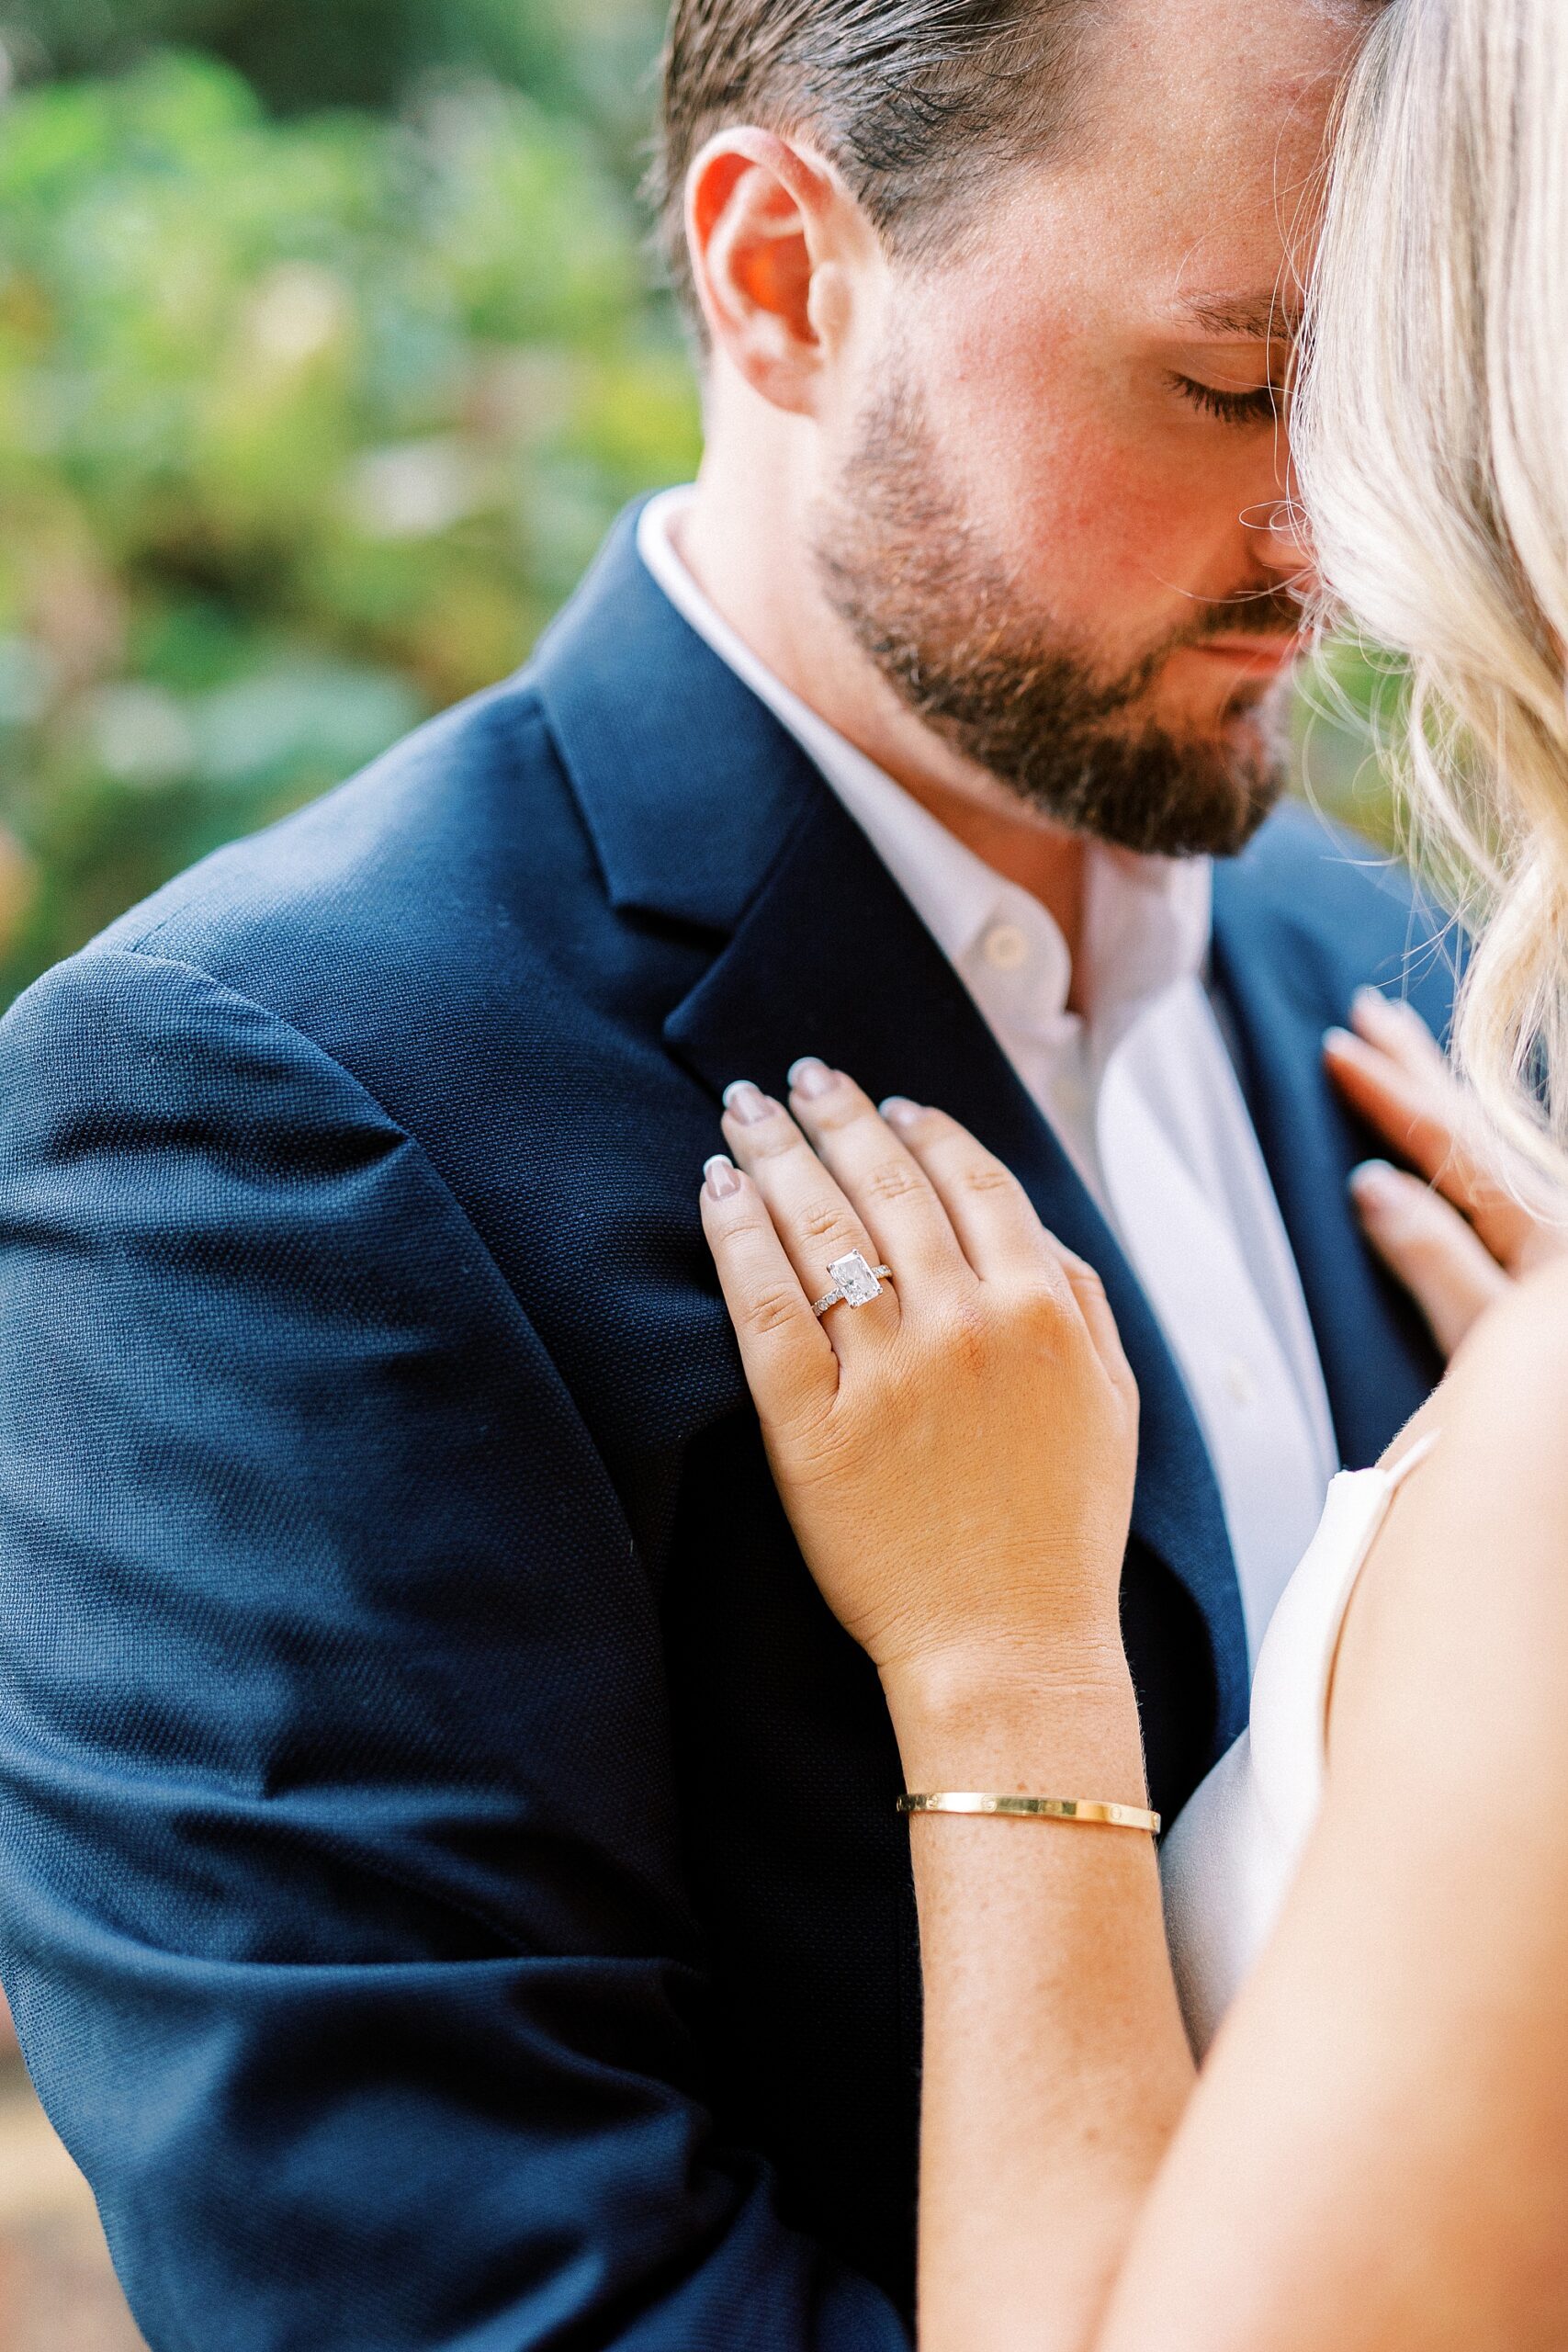 woman puts hand on groom's chest in navy suit 